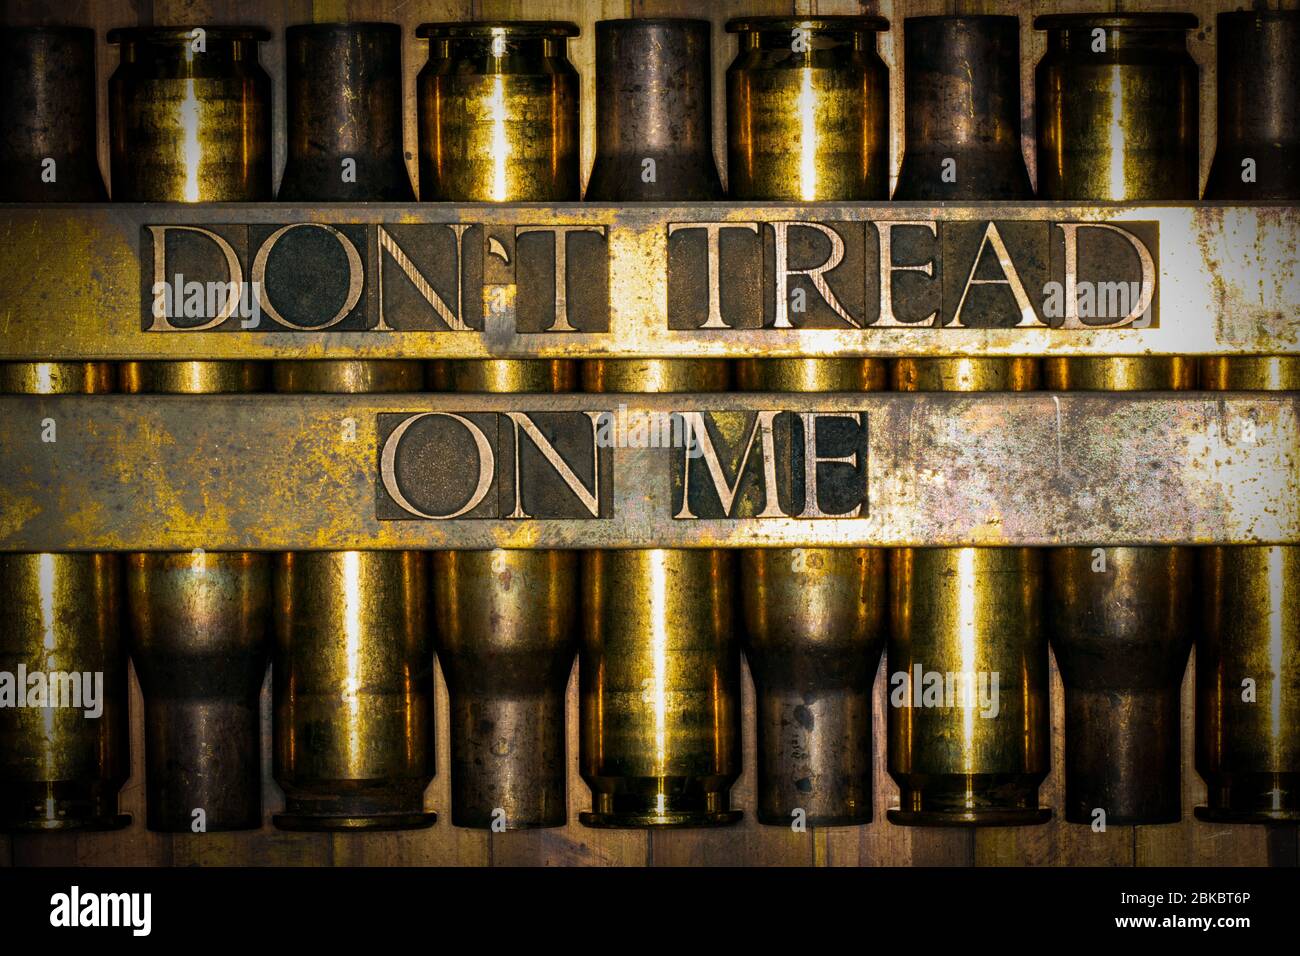 Photo of real authentic typeset letters forming Dont Tread On Me text on vintage textured grunge copper background over layer of 50 caliber bullet cas Stock Photo